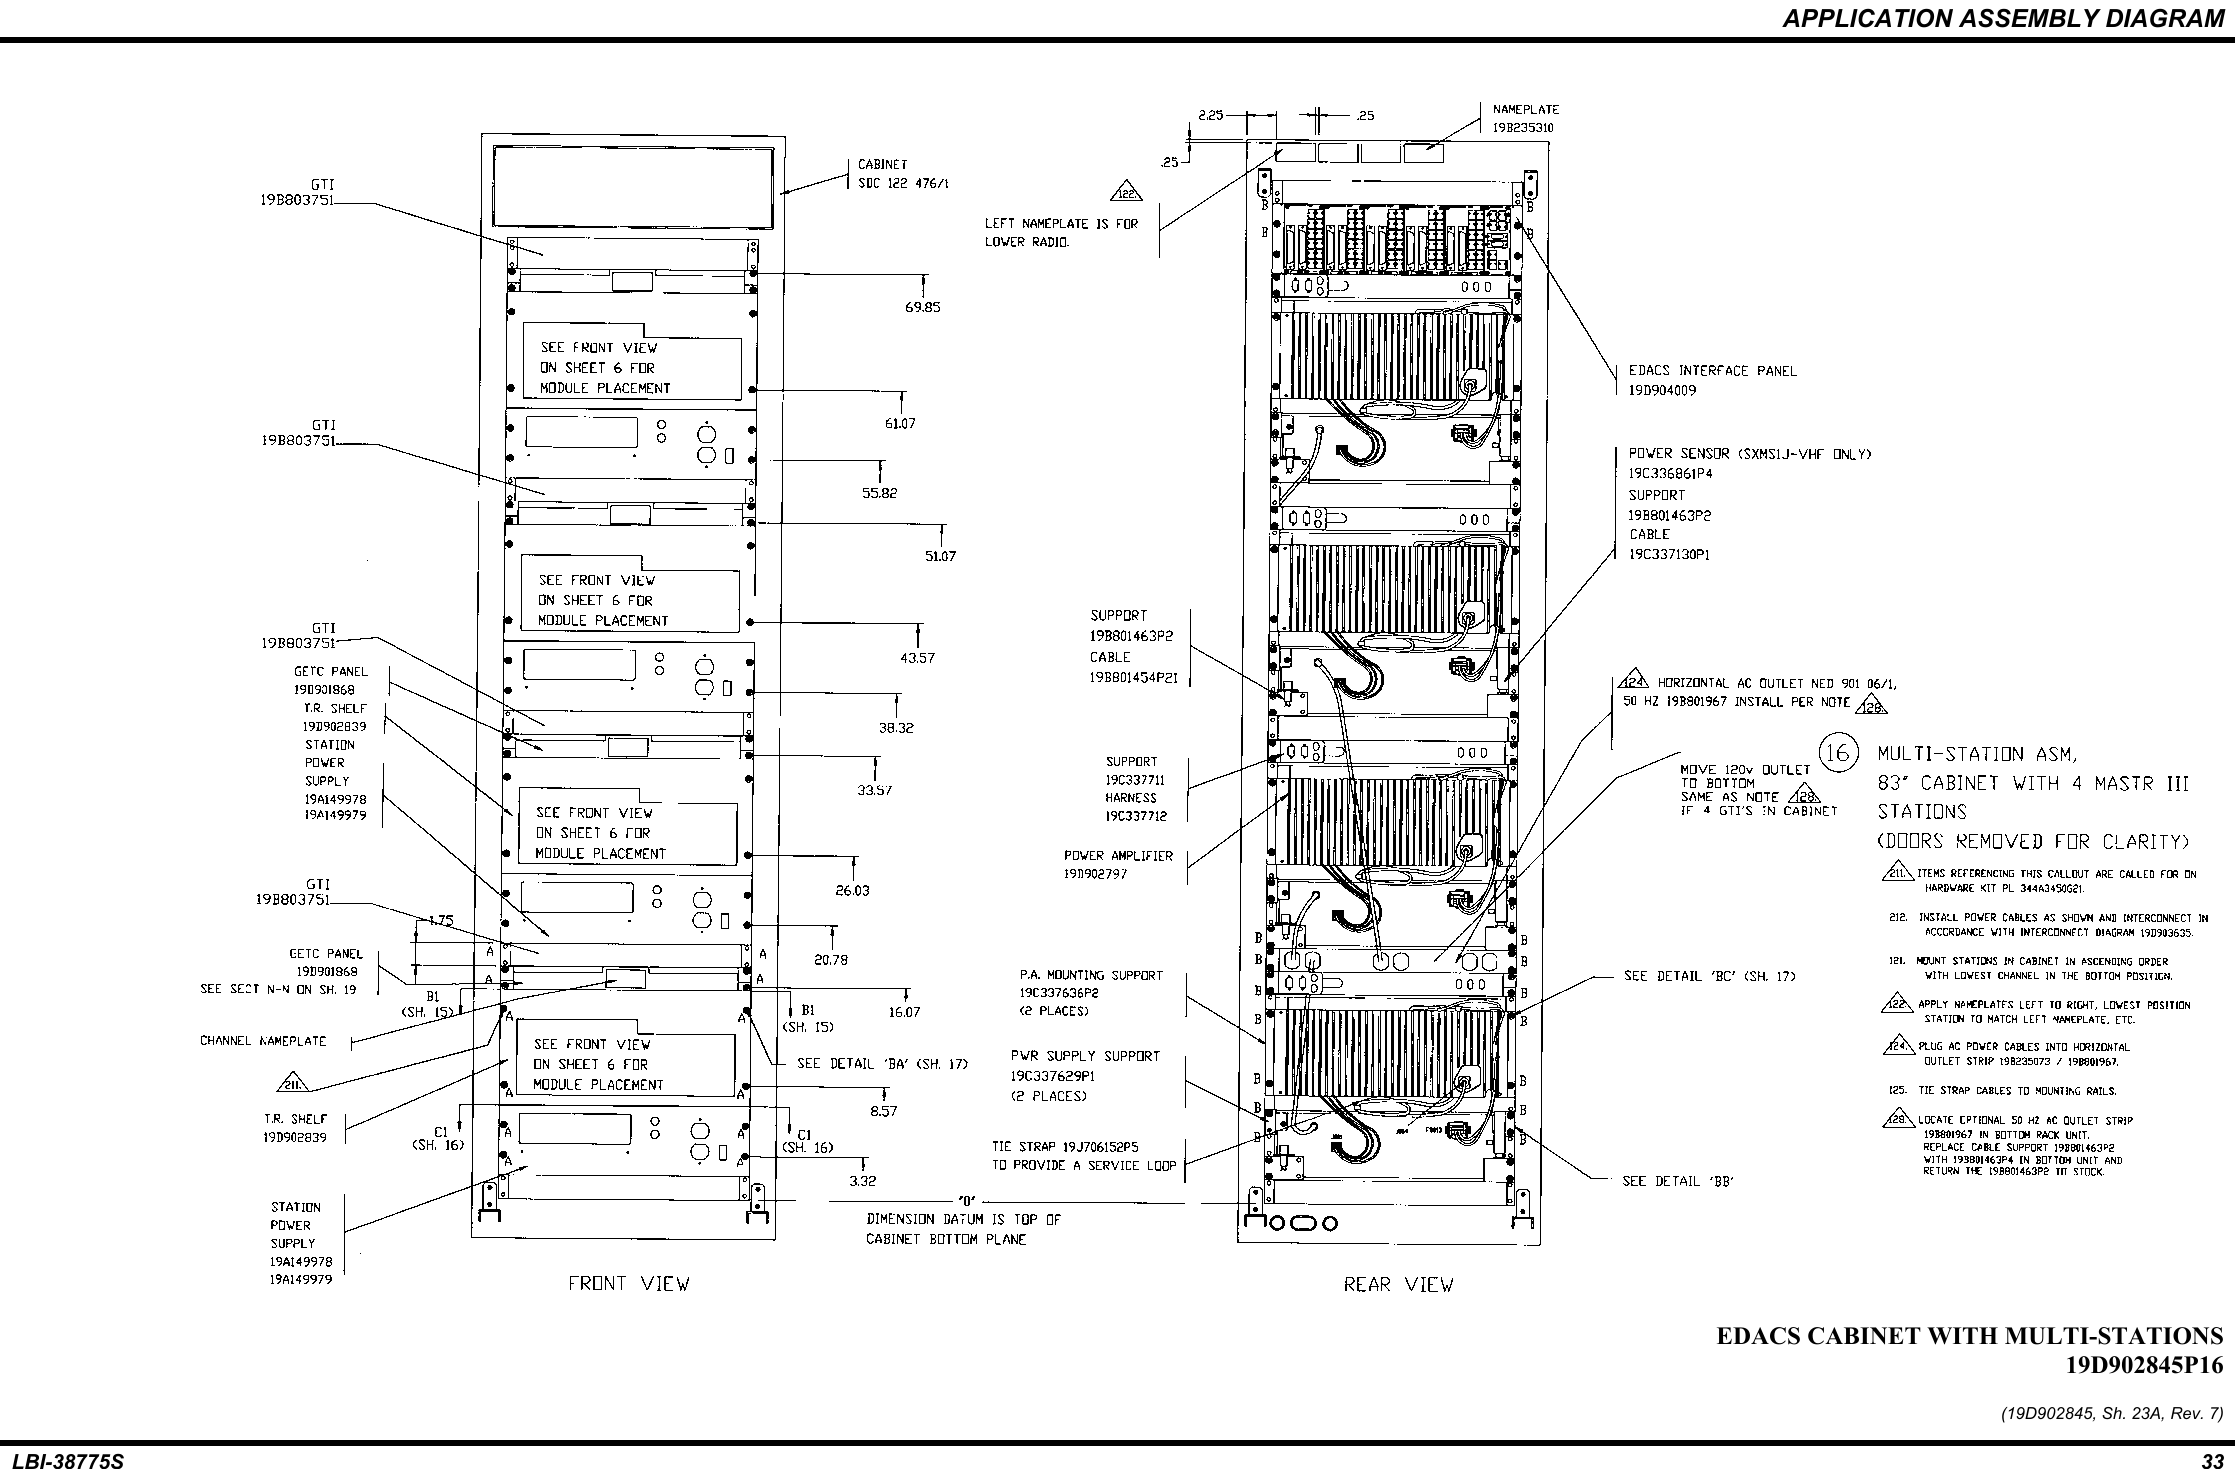 APPLICATION ASSEMBLY DIAGRAMLBI-38775S 33EDACS CABINET WITH MULTI-STATIONS19D902845P16(19D902845, Sh. 23A, Rev. 7)